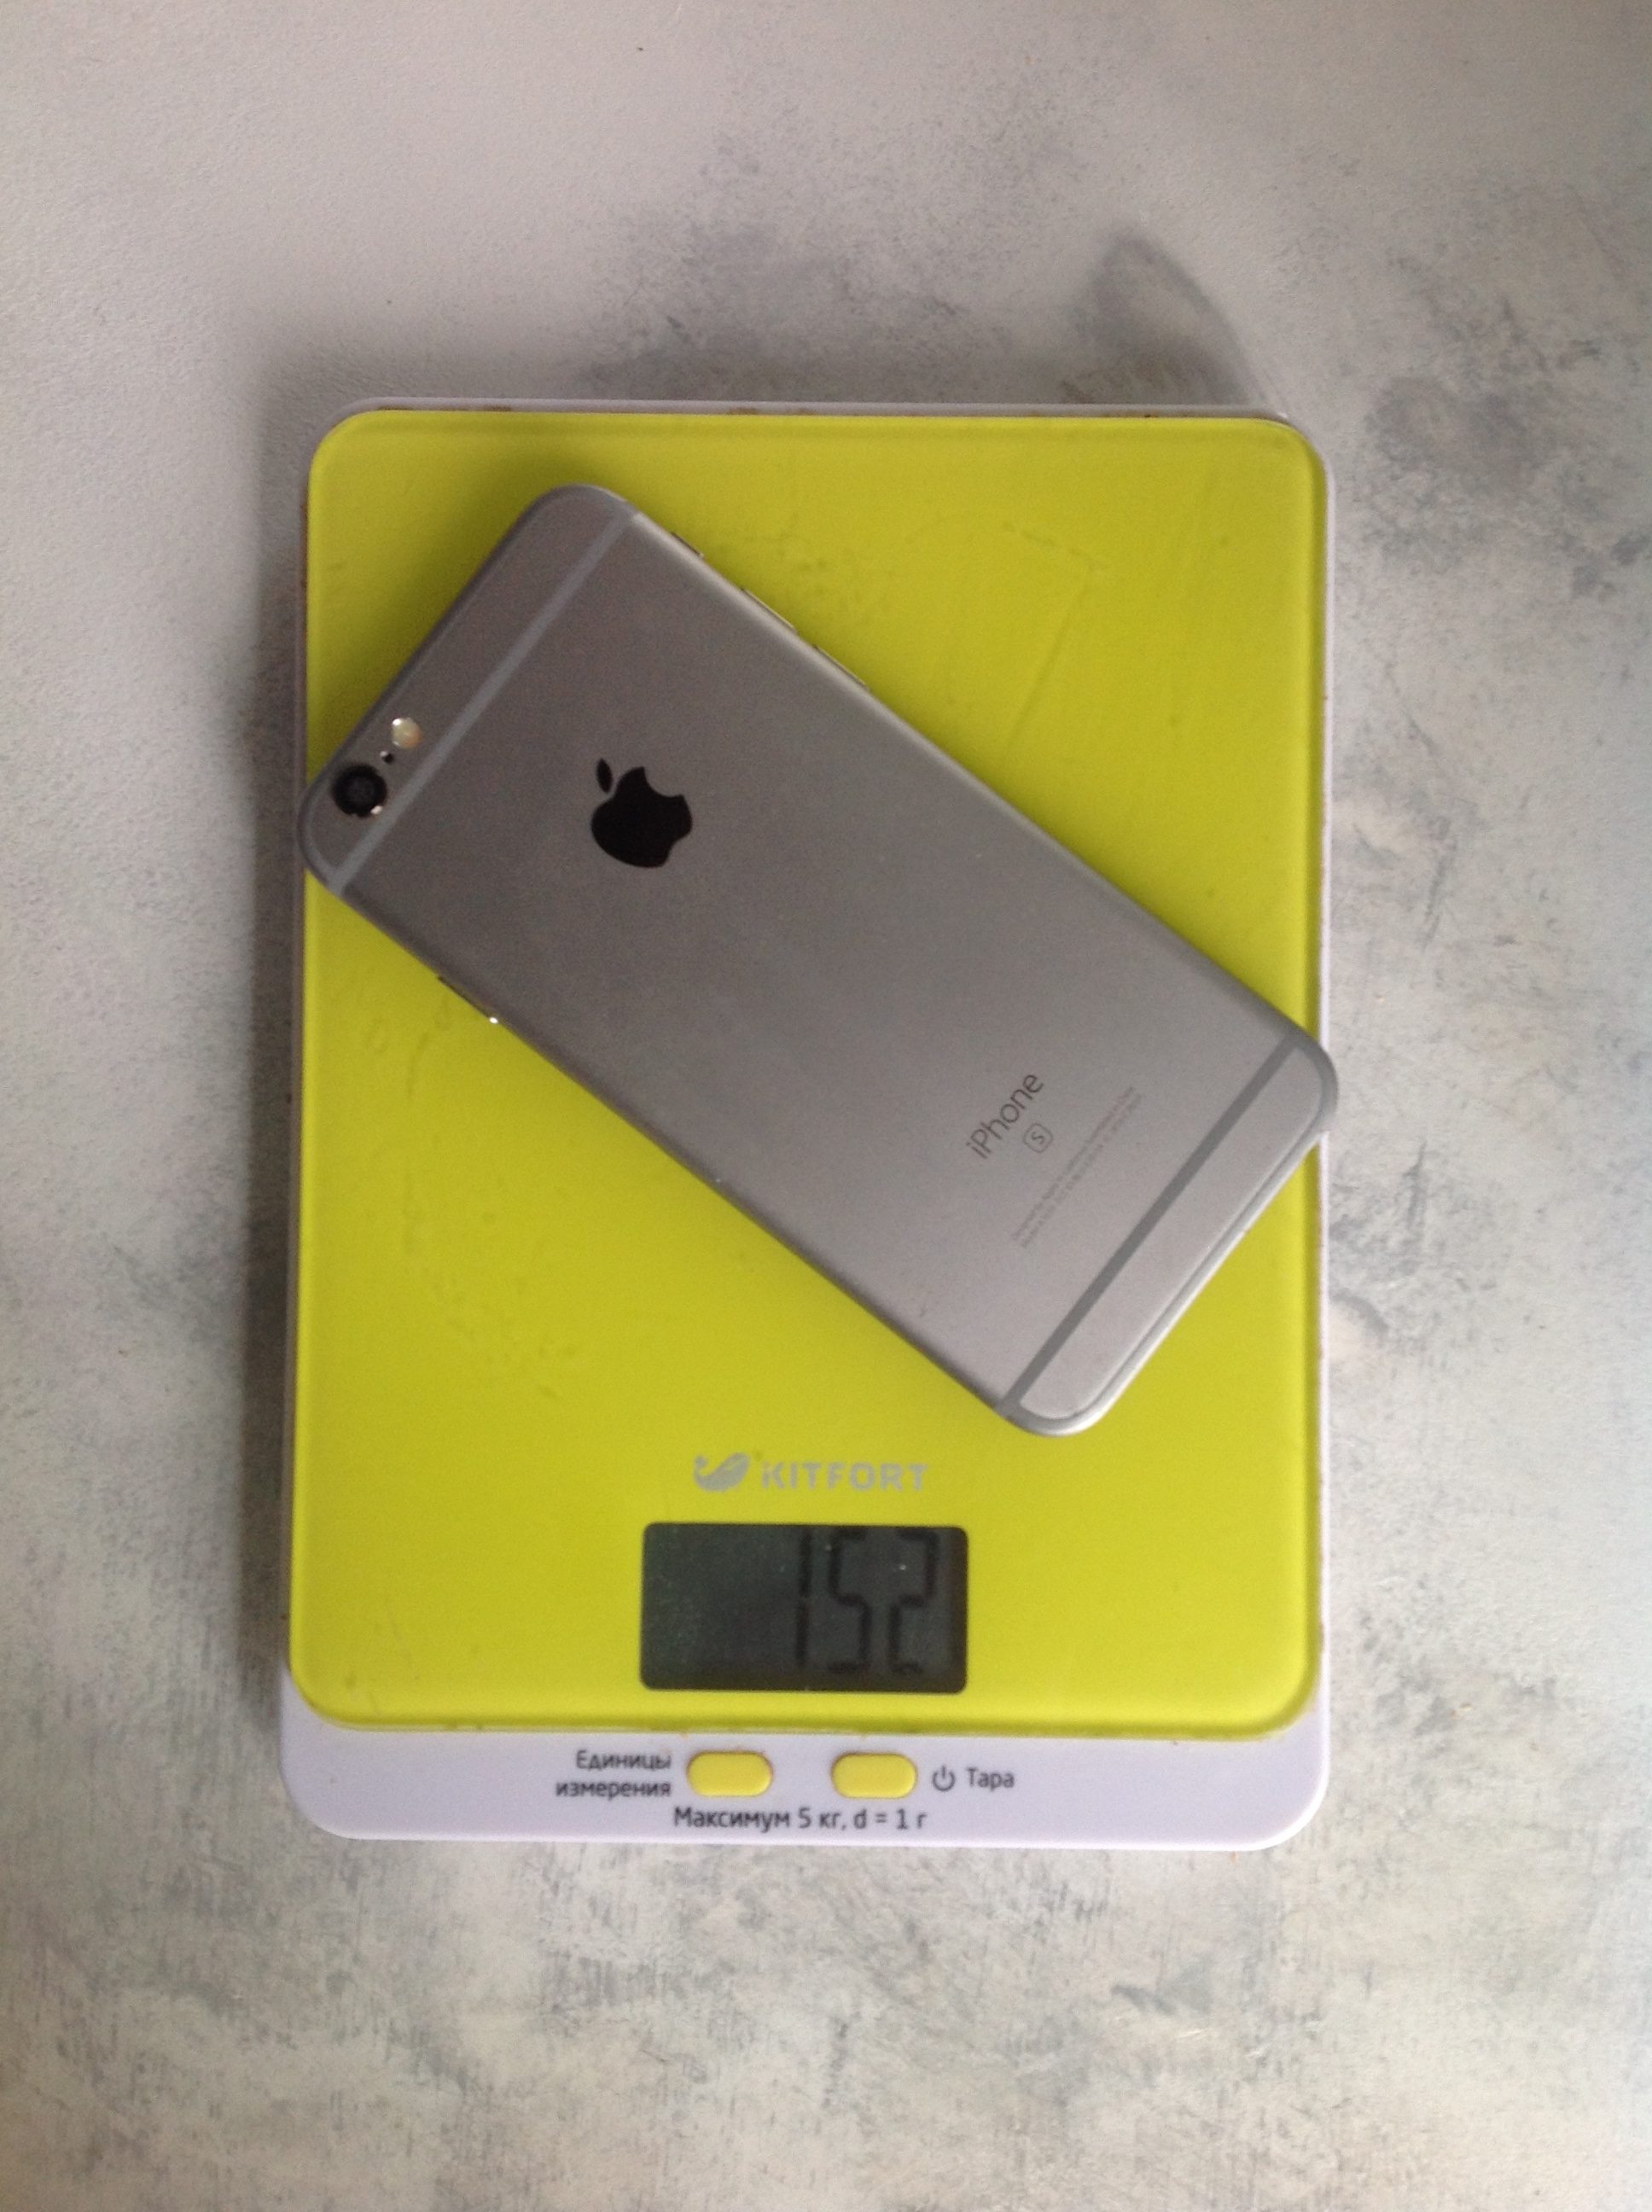 the weight of the iPhone 6s